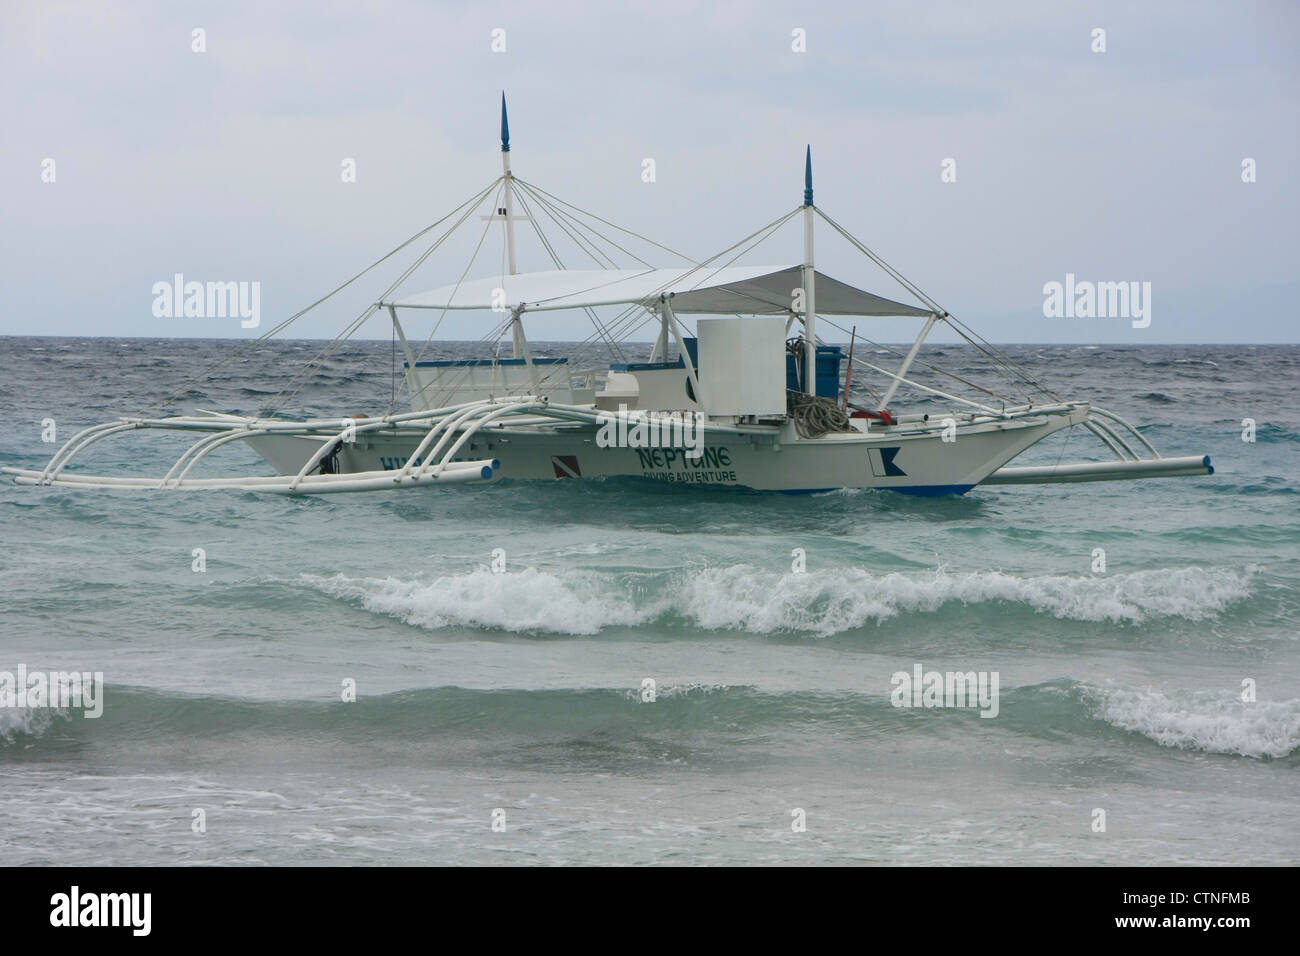 Outrigger boat in a stormy sea, Philippines Stock Photo